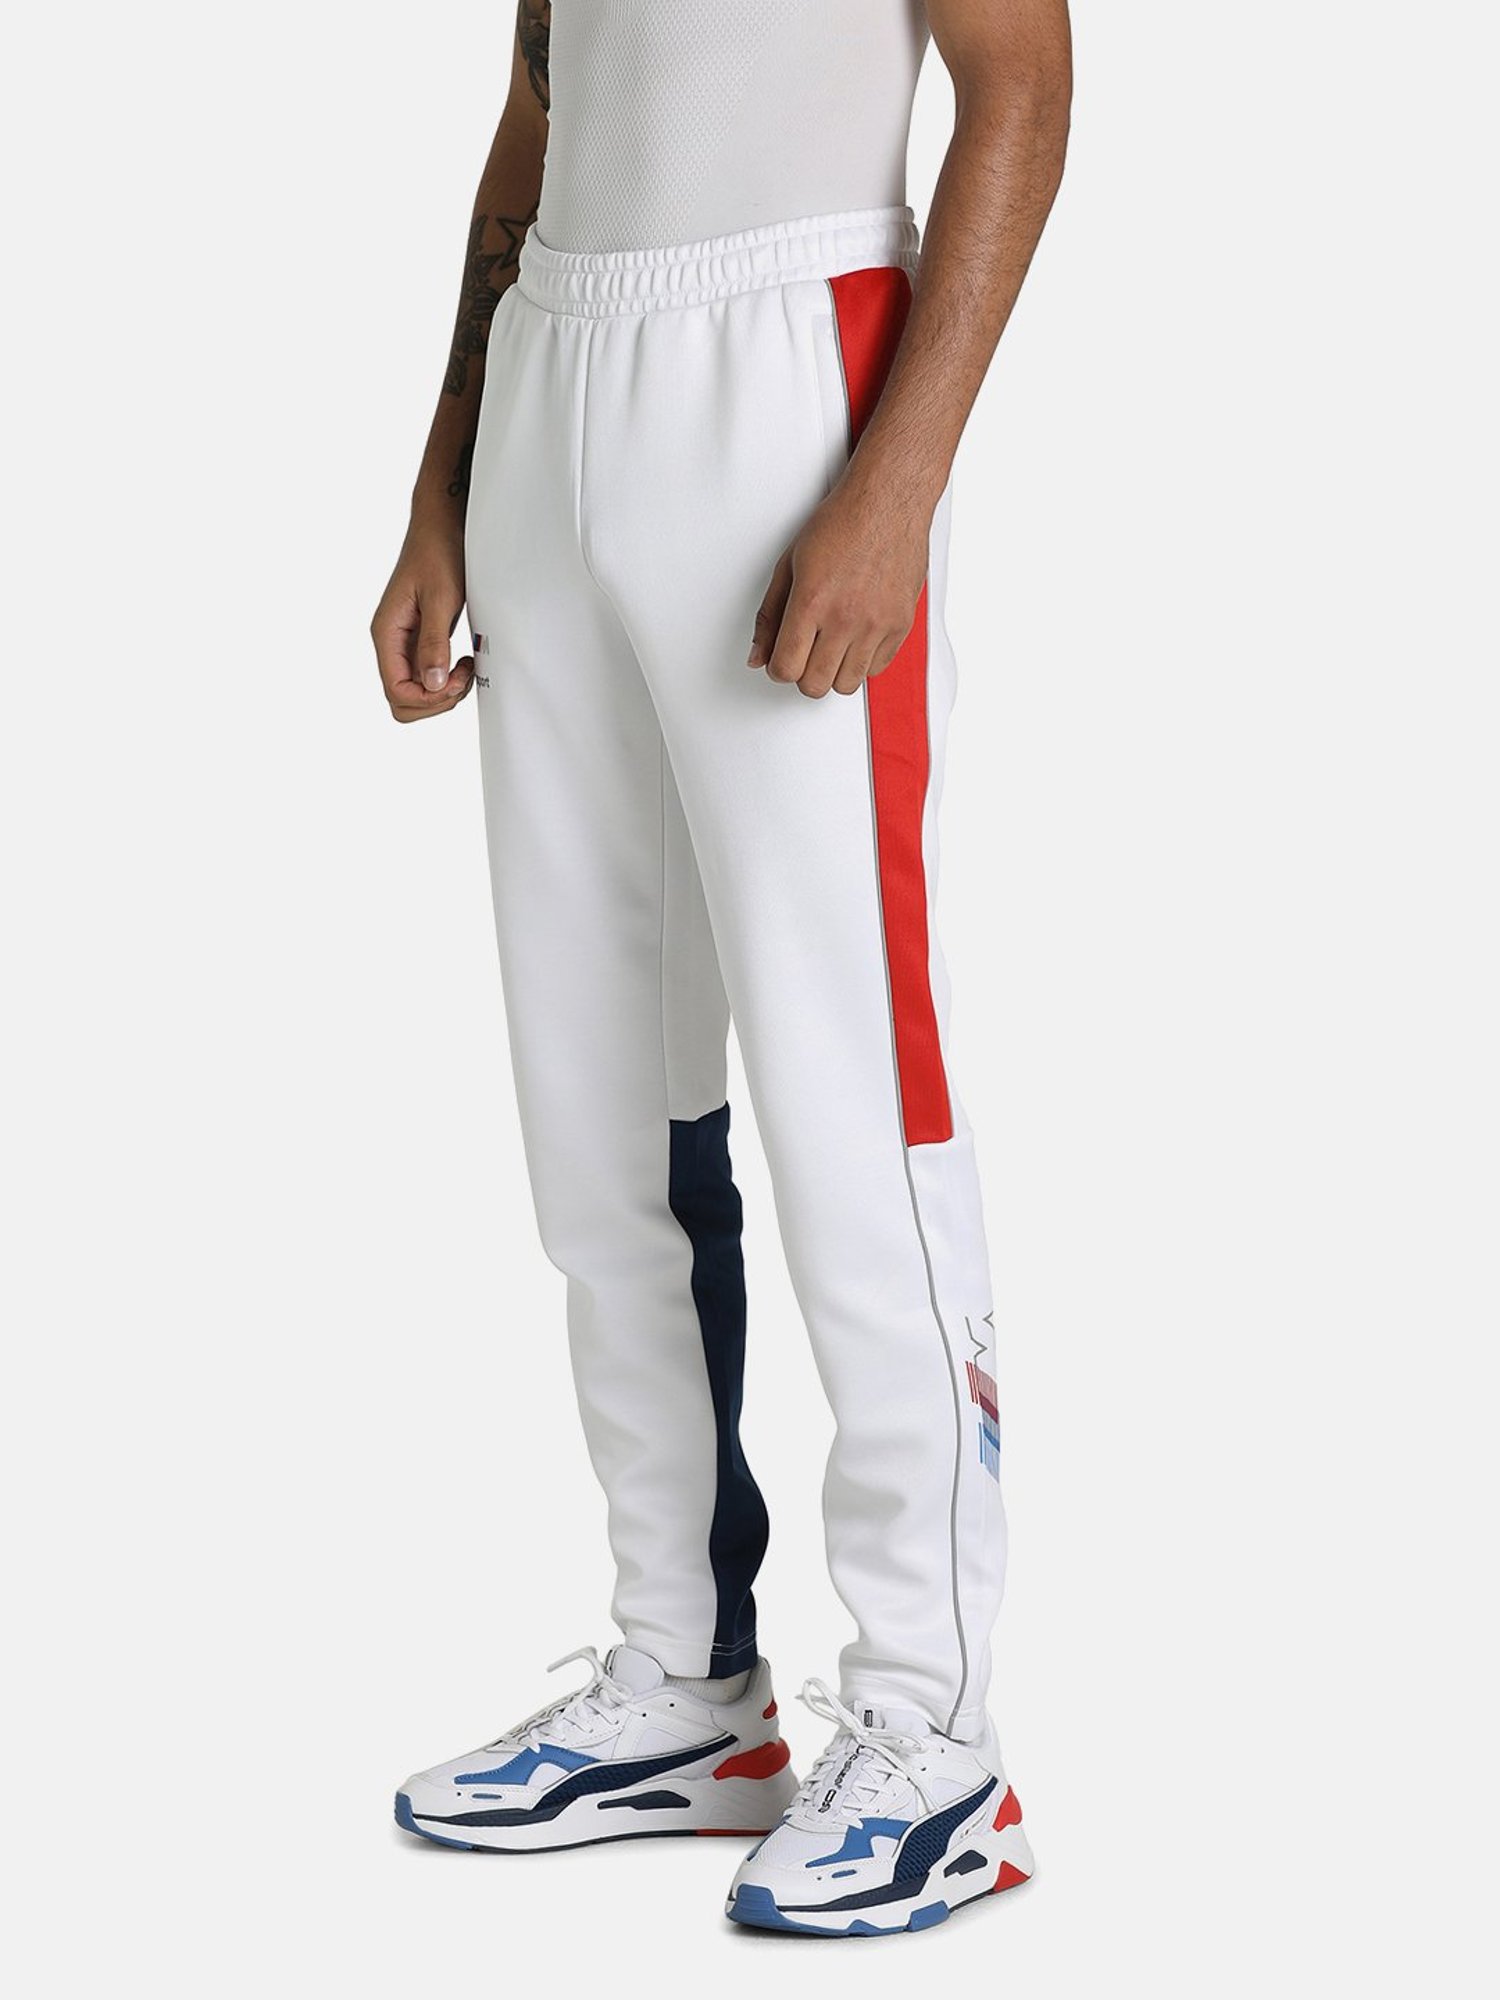 PUMA Power Pants Printed Women White Track Pants  Buy PUMA Power Pants  Printed Women White Track Pants Online at Best Prices in India  Shopsyin